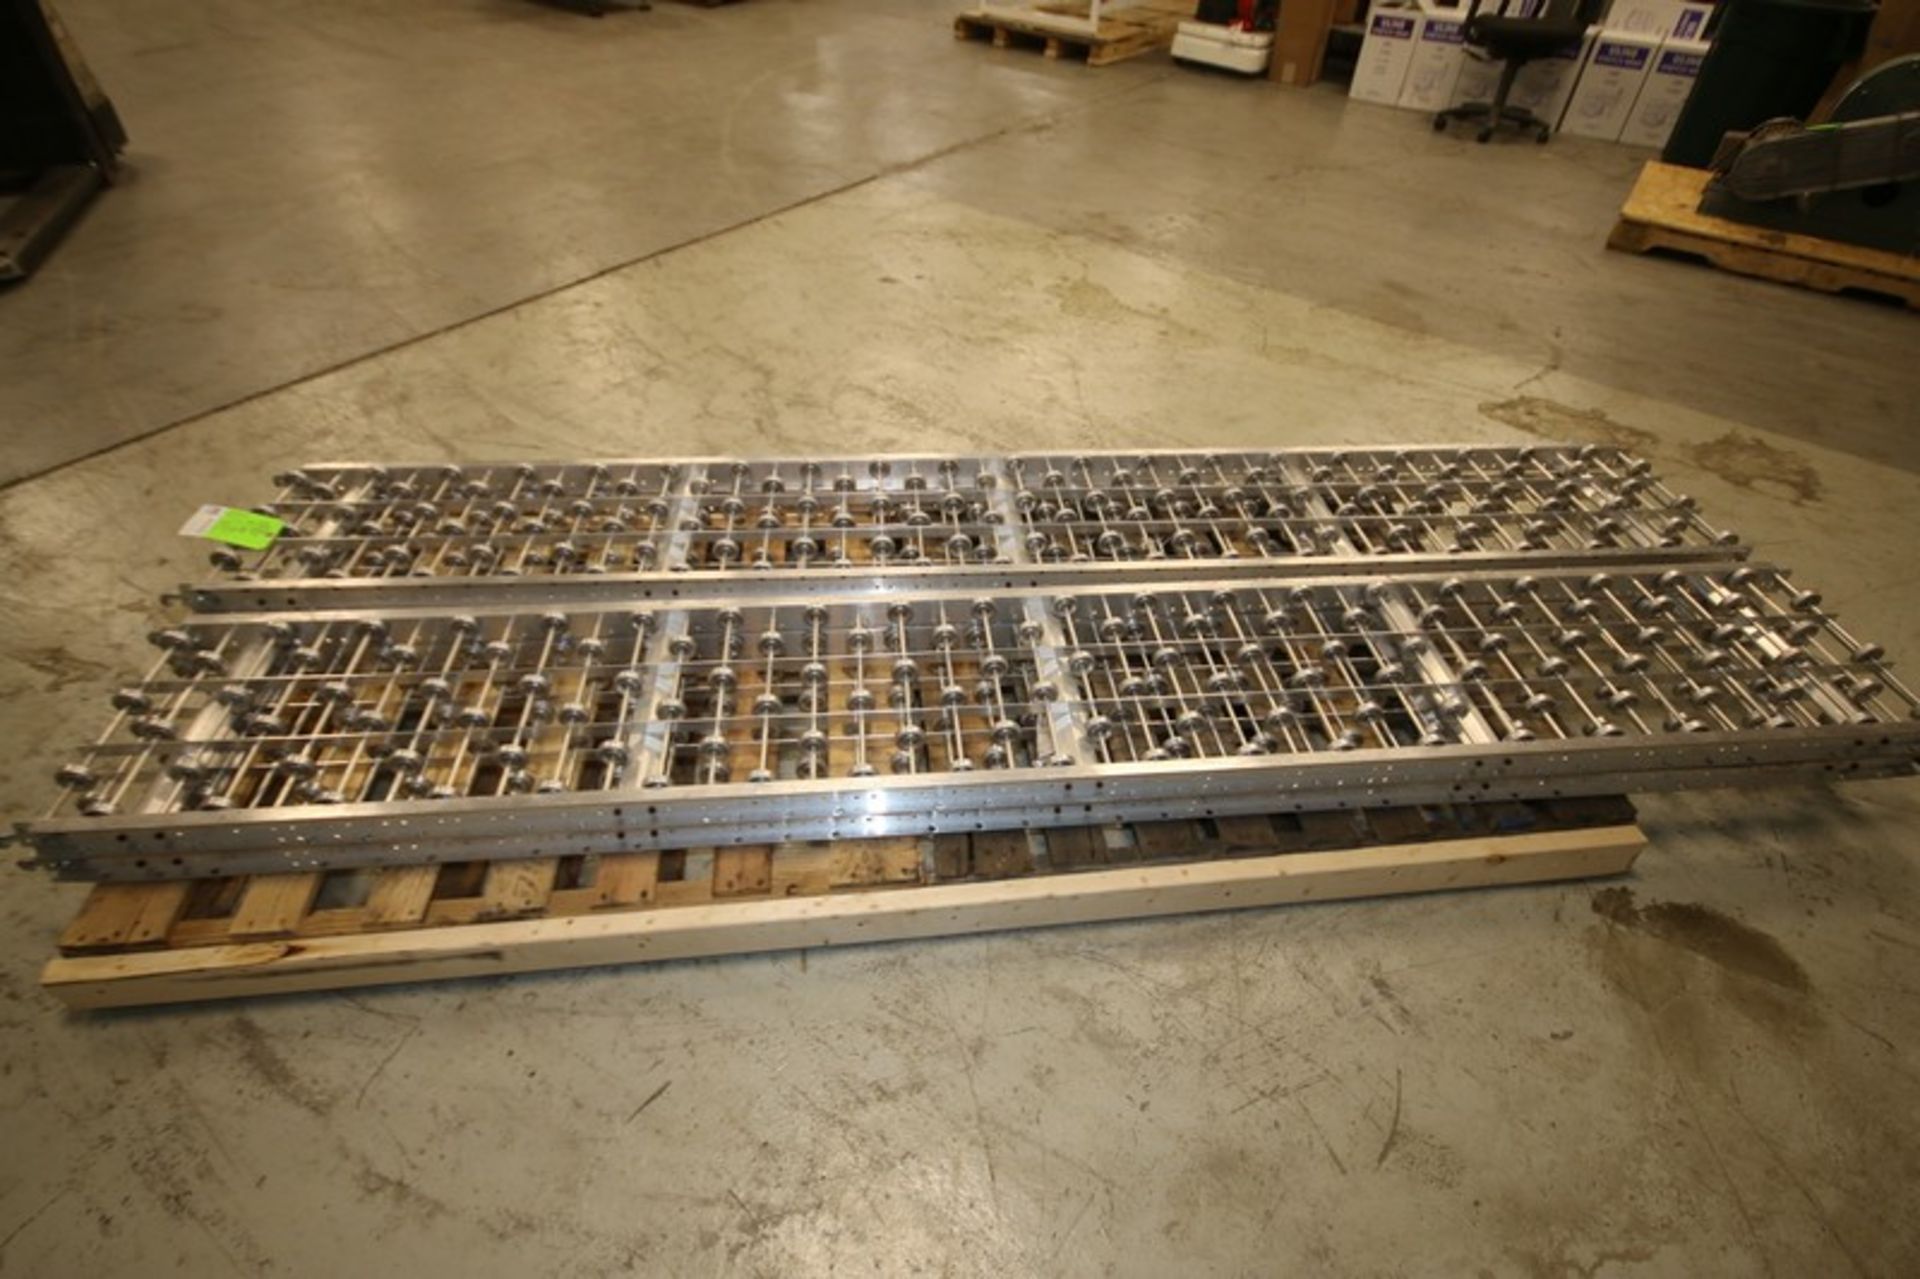 Lot of (4) 10' L x 16" W Aluminum Skate Conveyor Sections (INV#101632) (Located @ the MDG Auction - Image 3 of 4